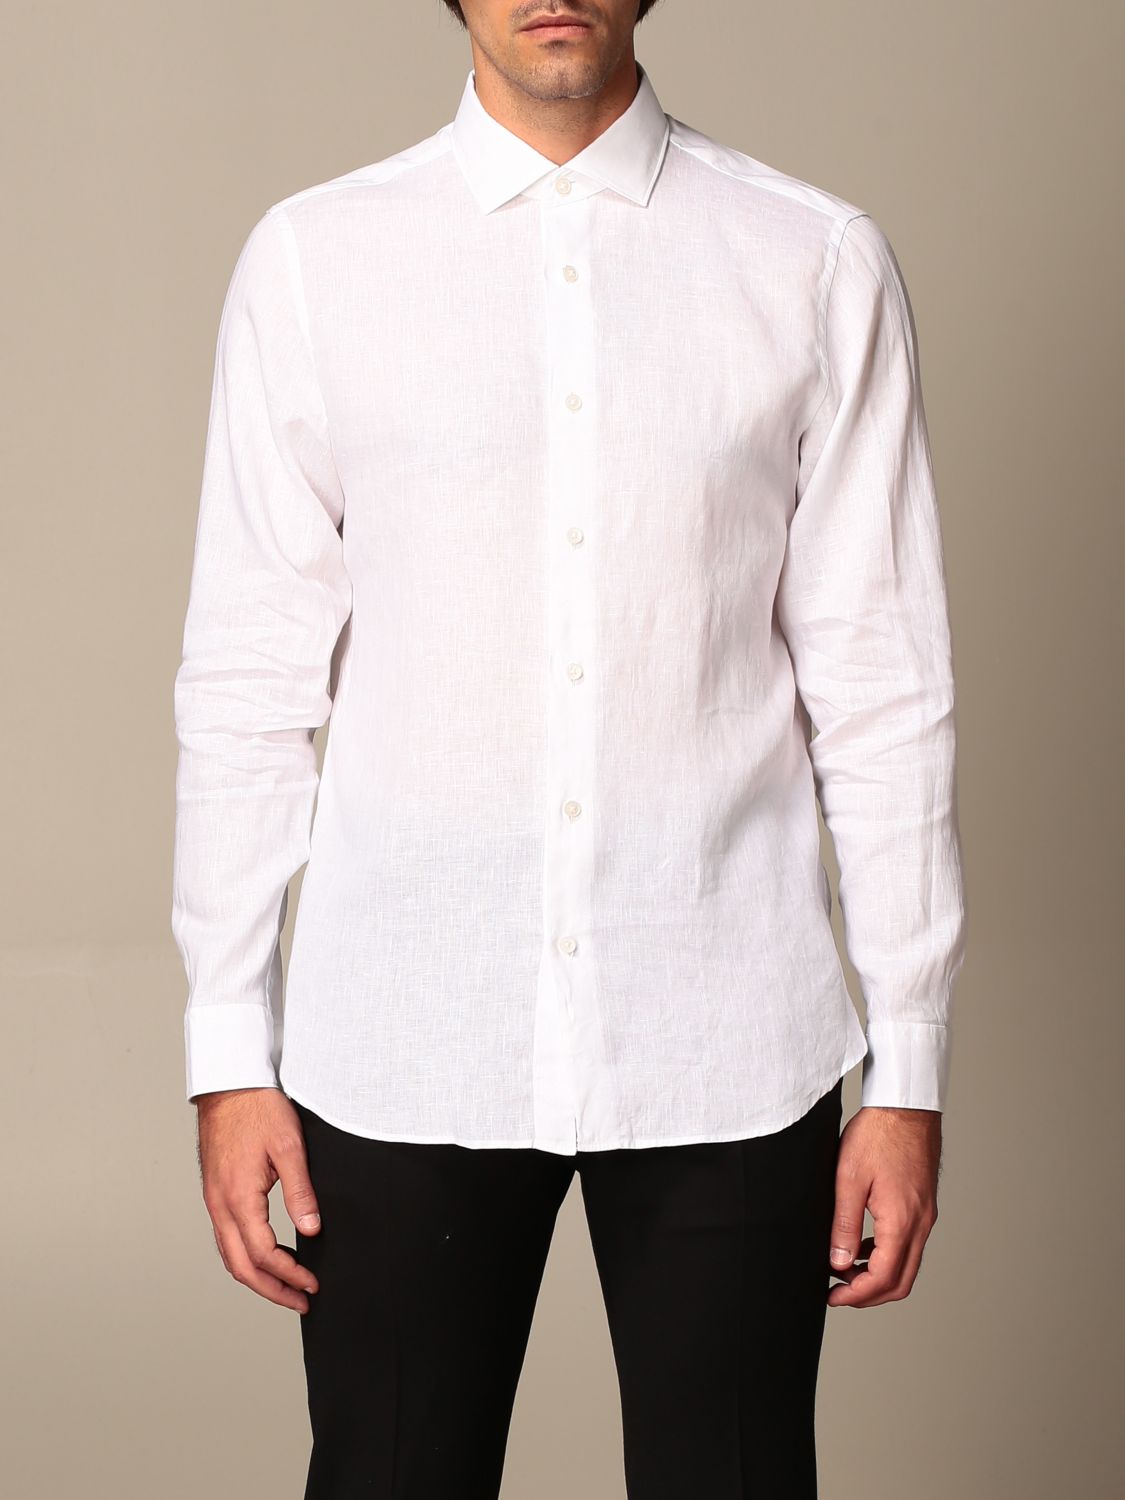 Z Zegna Outlet: linen shirt with French collar - White | Z Zegna shirt ...